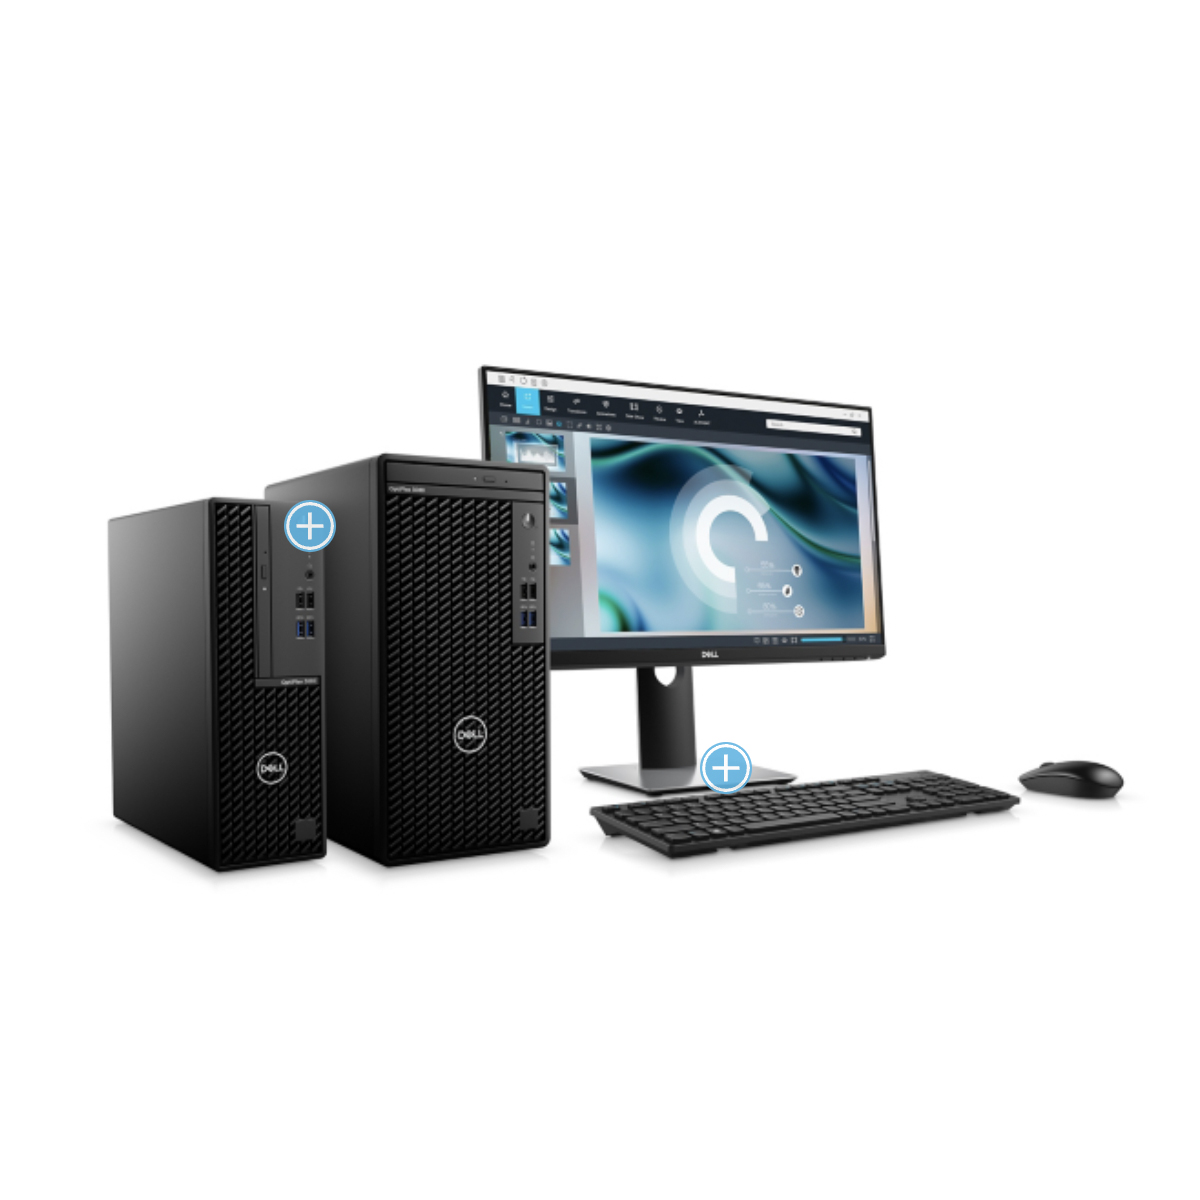 Need A Powerful Yet Compact Business Desktop. Consider The Dell OptiPlex 3080 Mini Tower